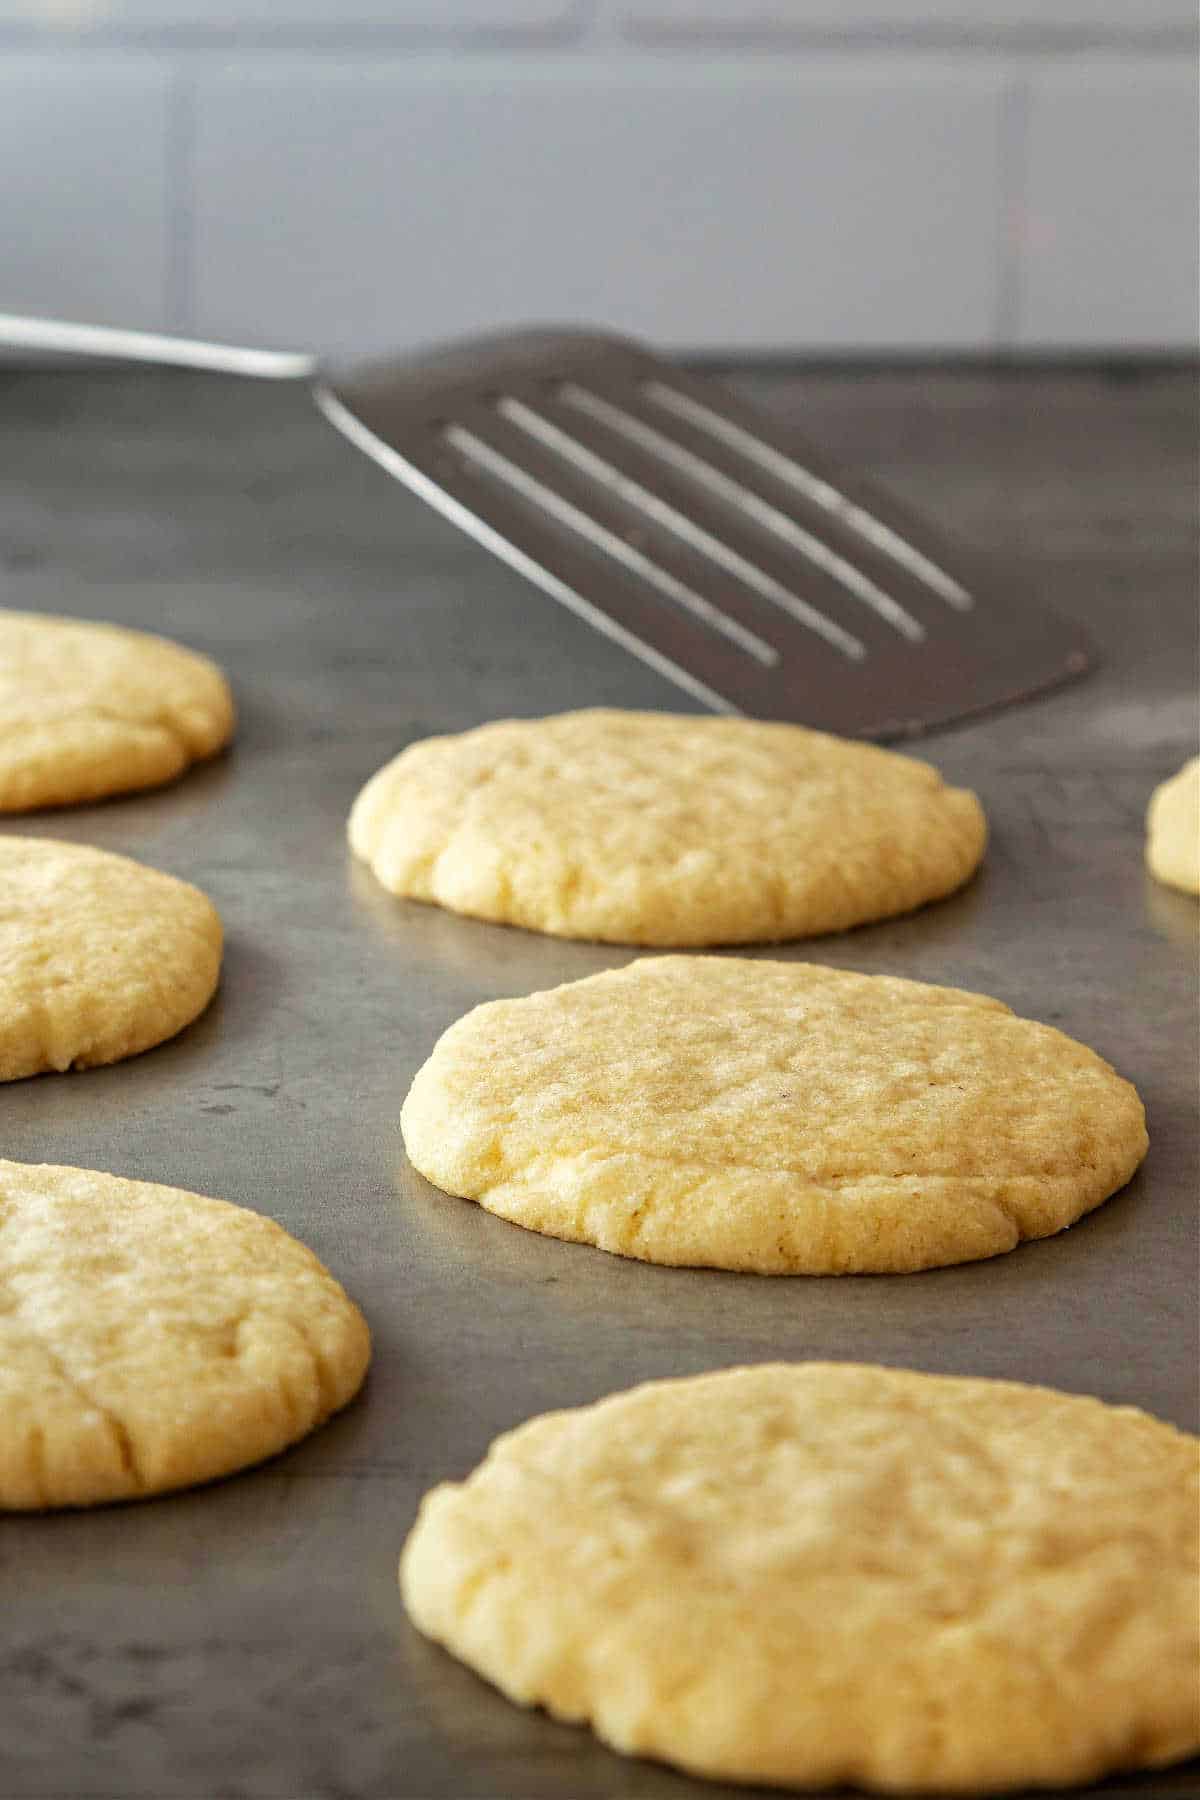 Several large, round sugar cookies on a sheetpan with a metal turner/spatula in the background.